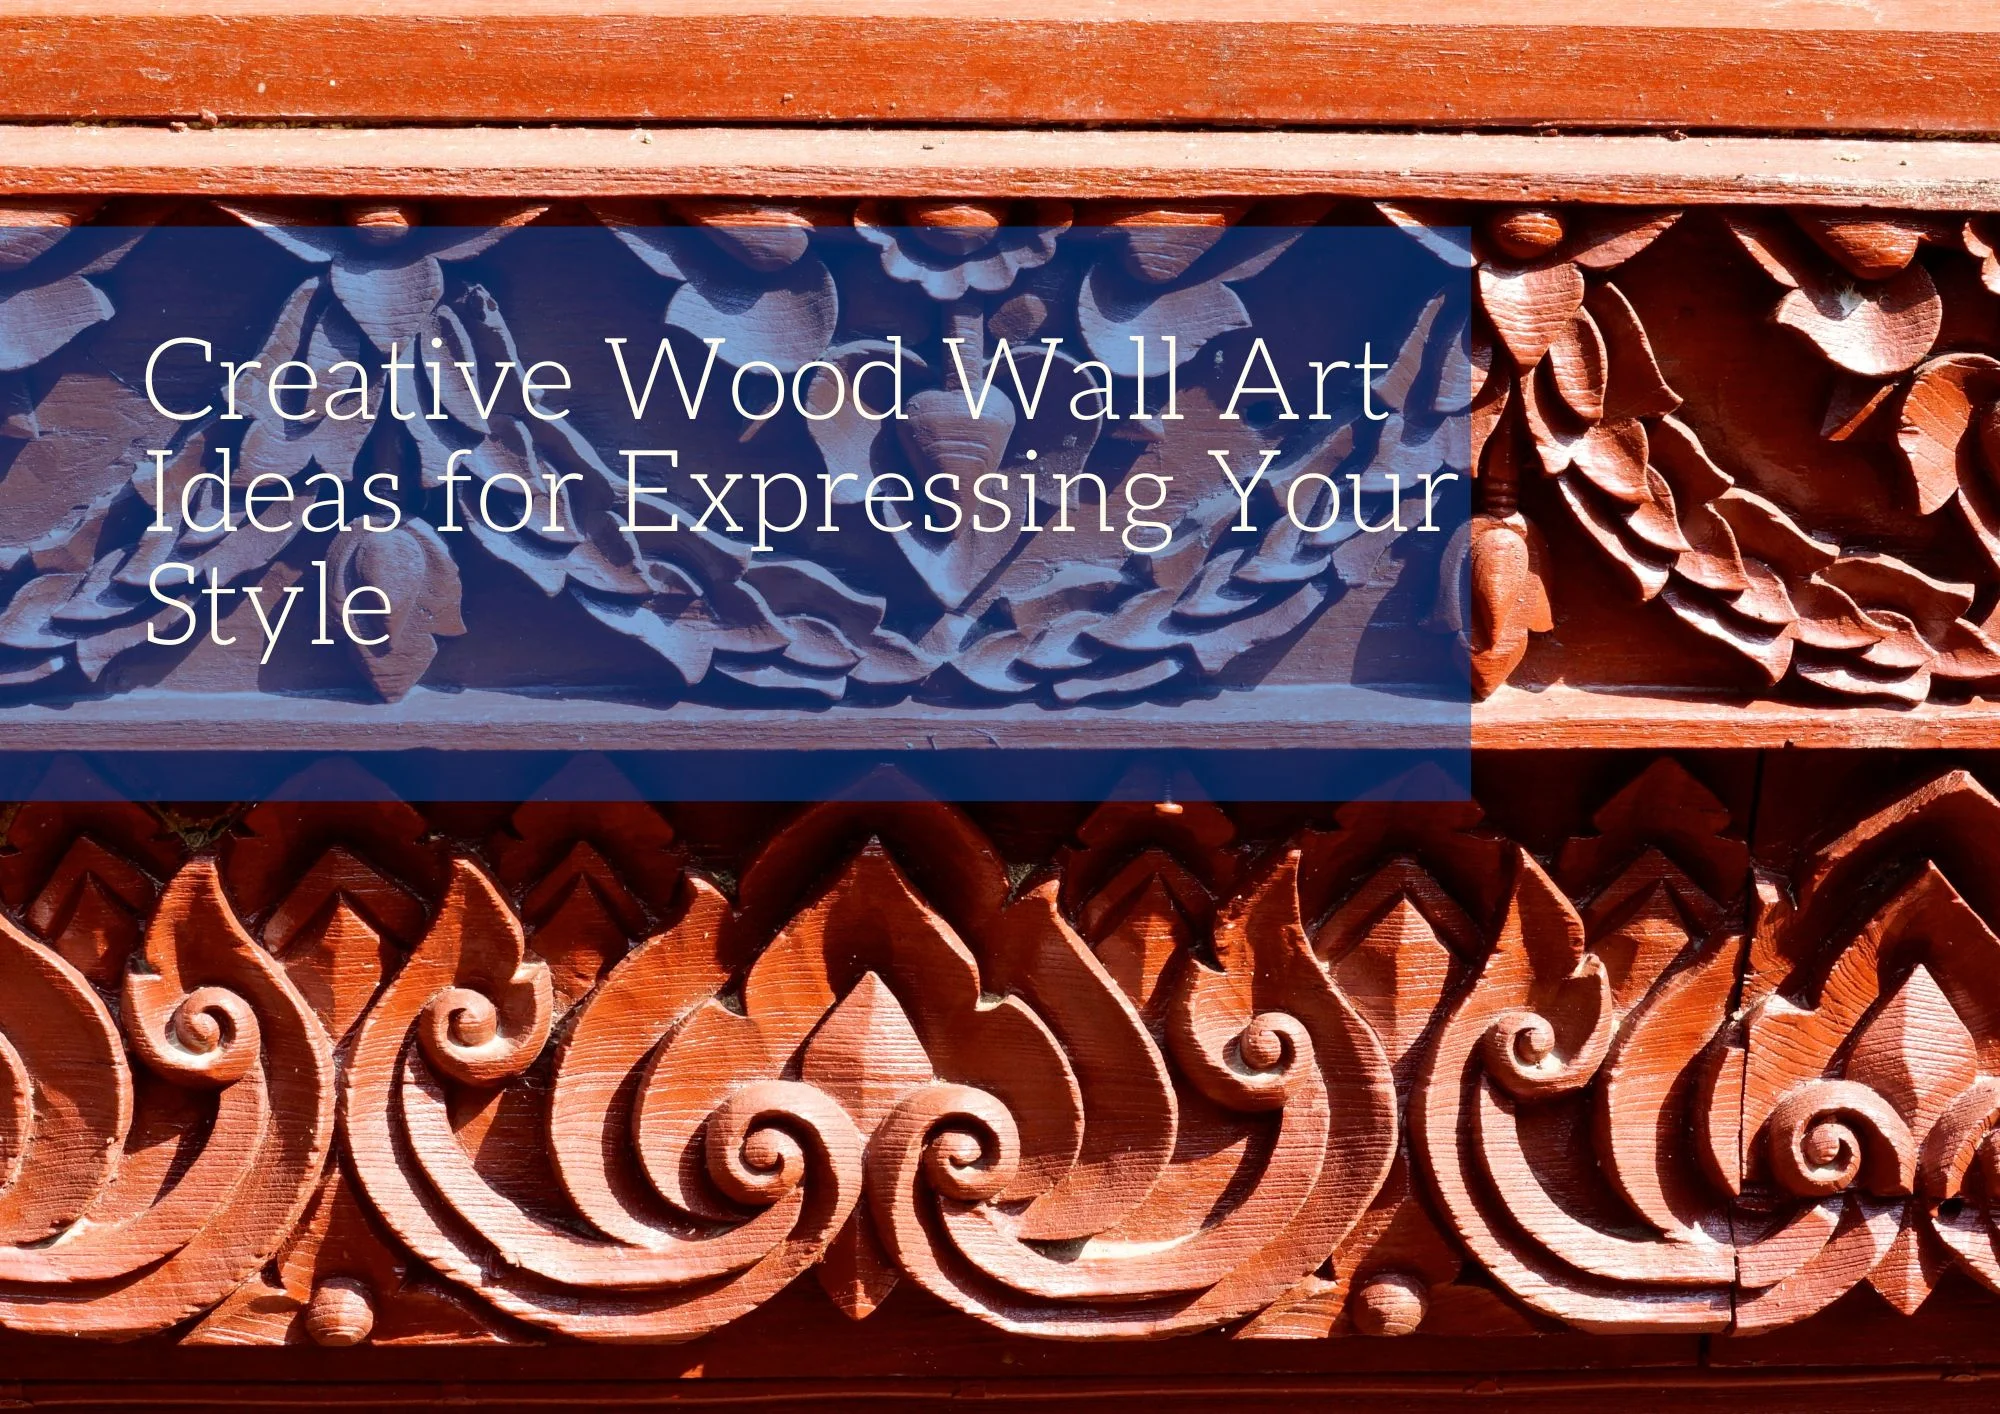 Creative Wood Wall Art Ideas for Expressing Your Style